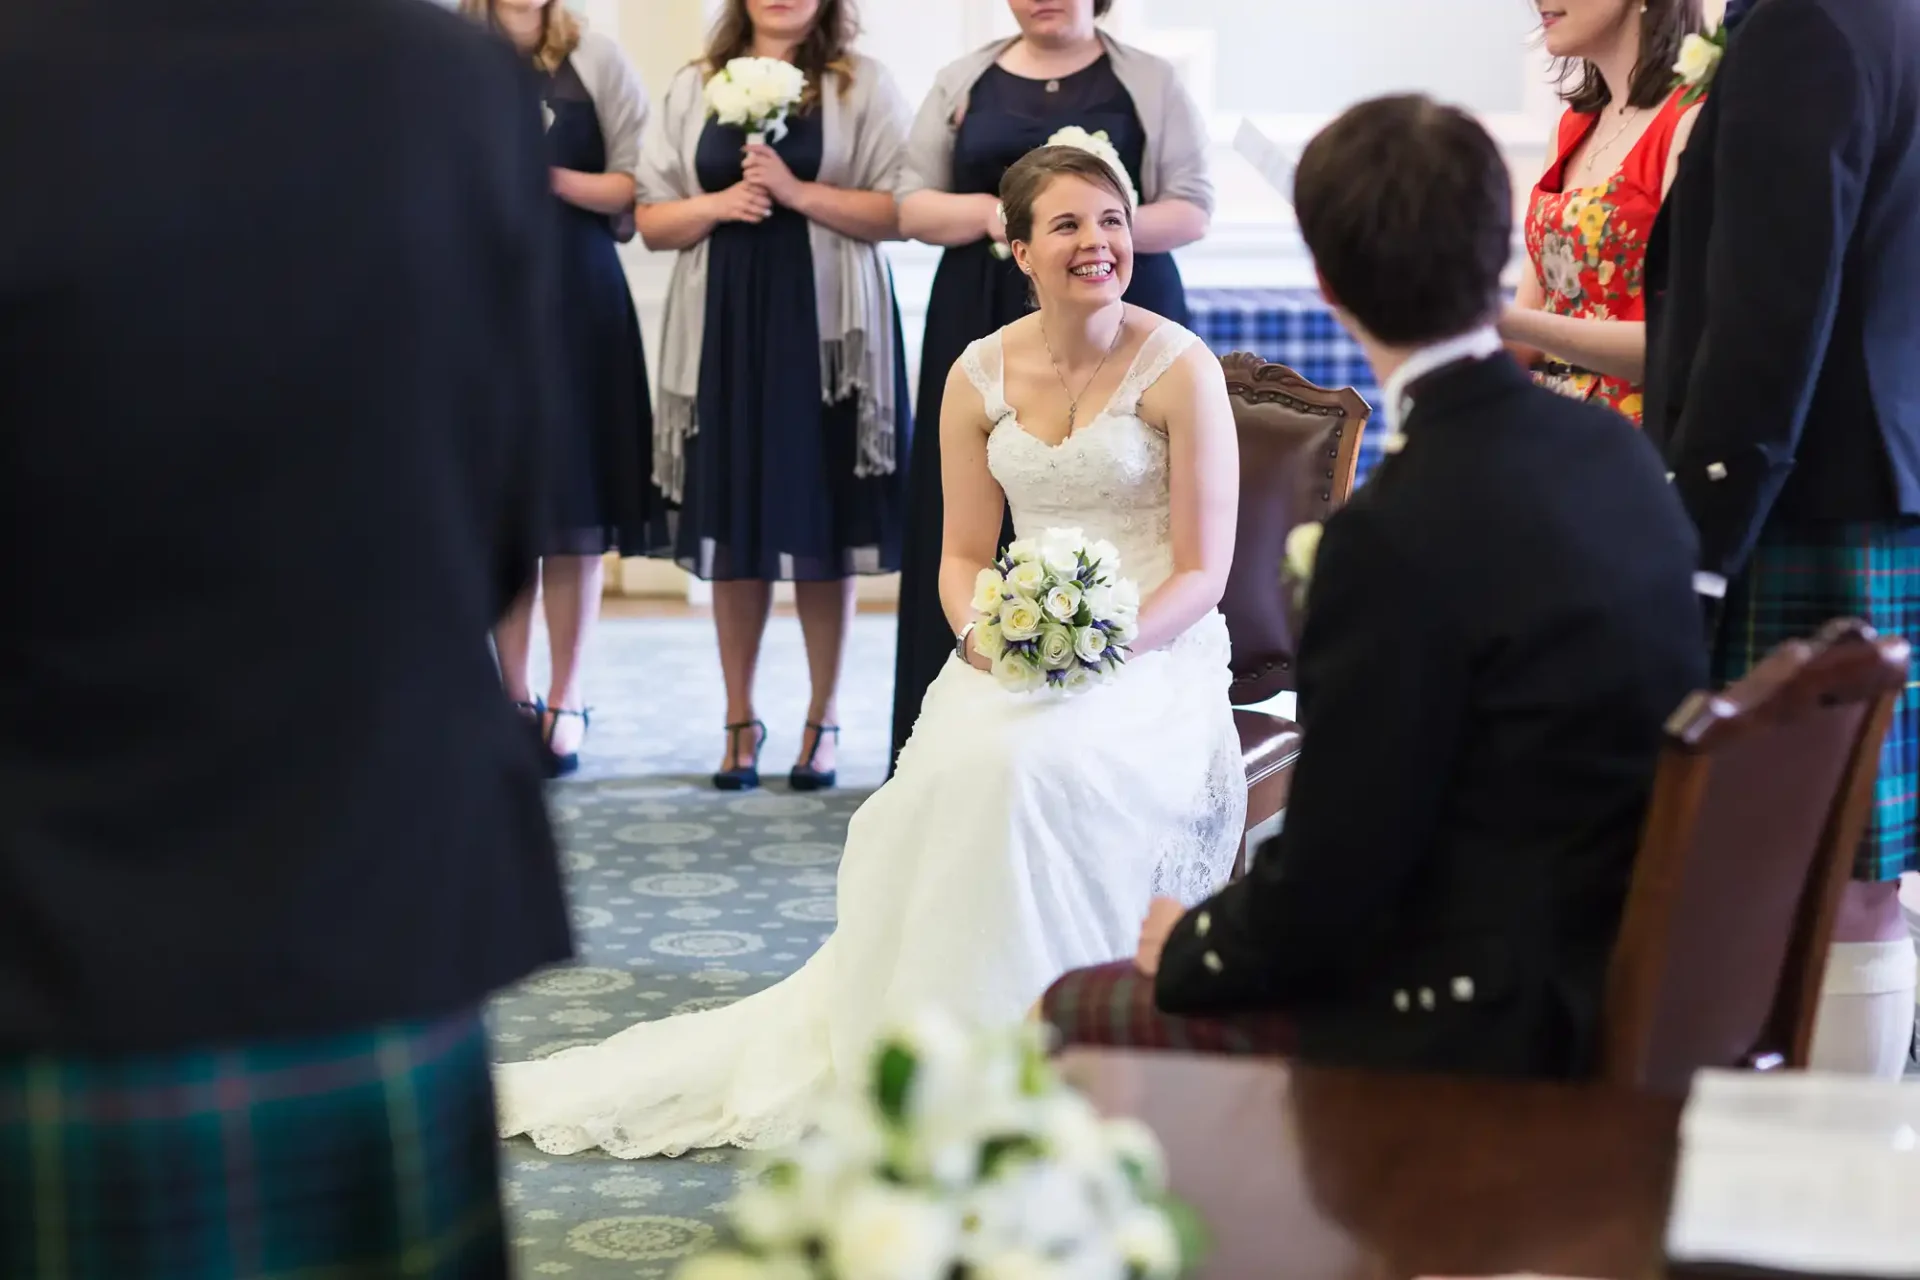 A bride in a white dress laughs joyfully while seated, facing a groom in a kilt, surrounded by guests in a room with floral decorations.